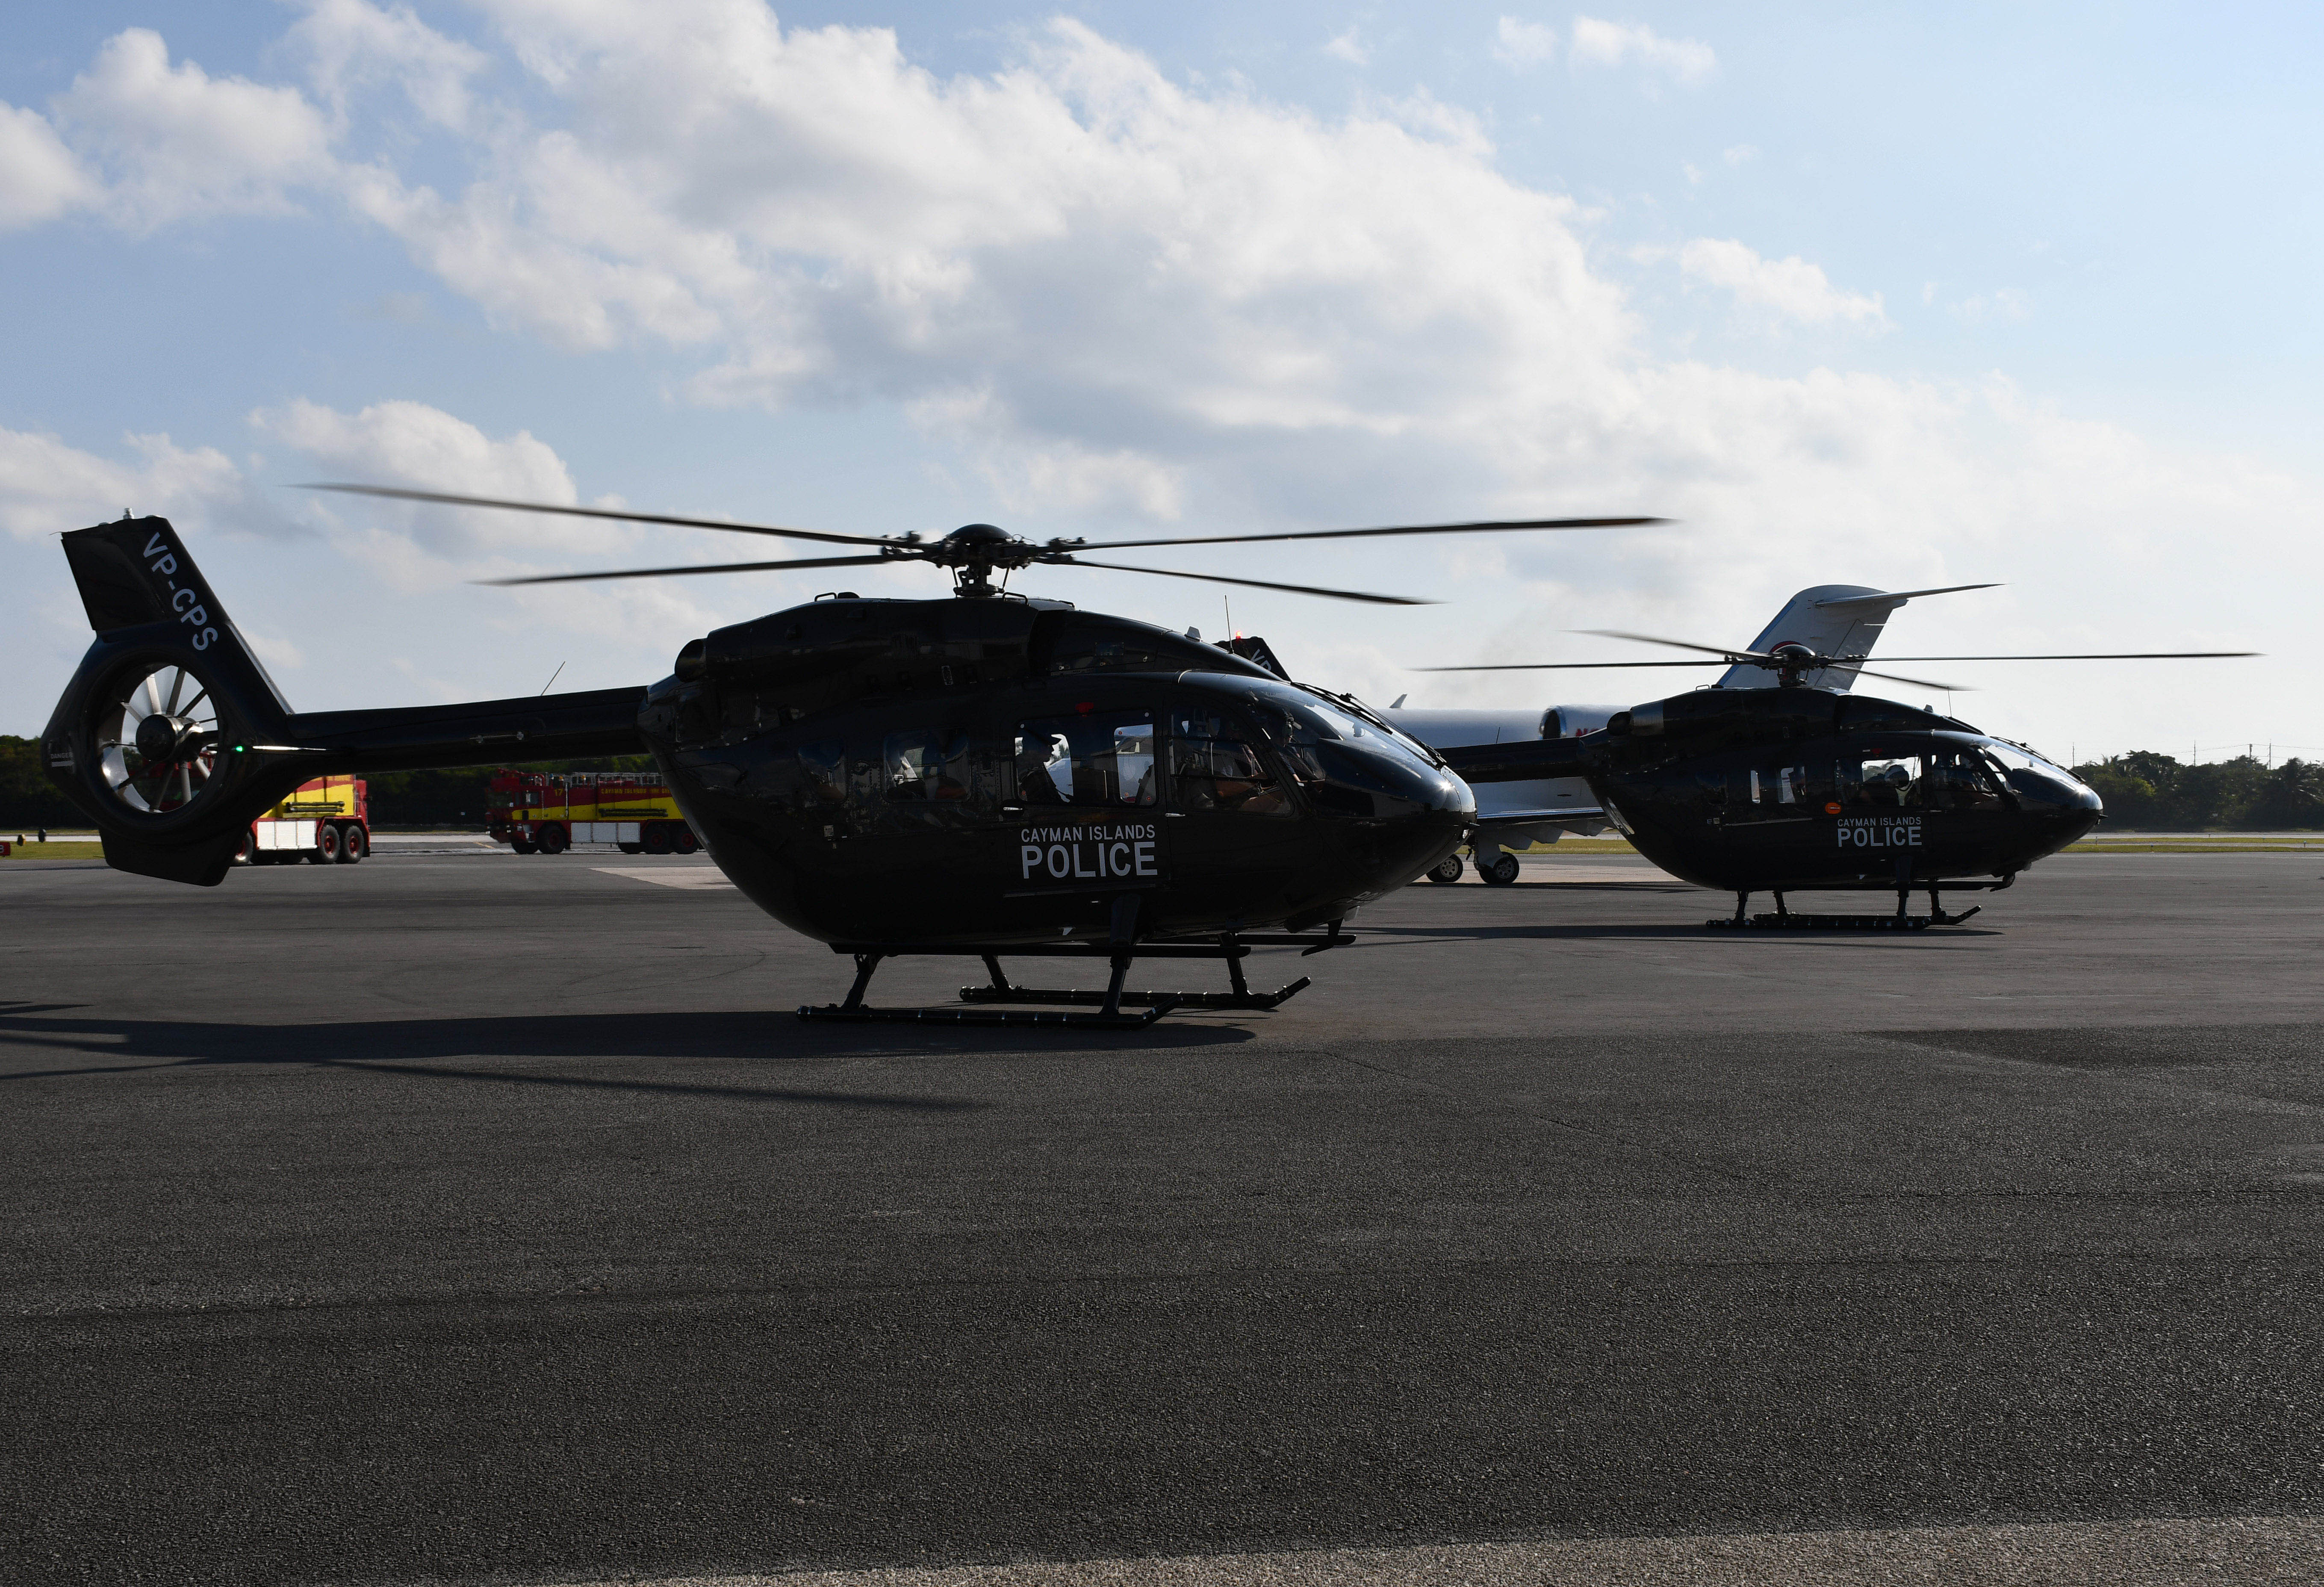 3. Two RCIPS helicopters together